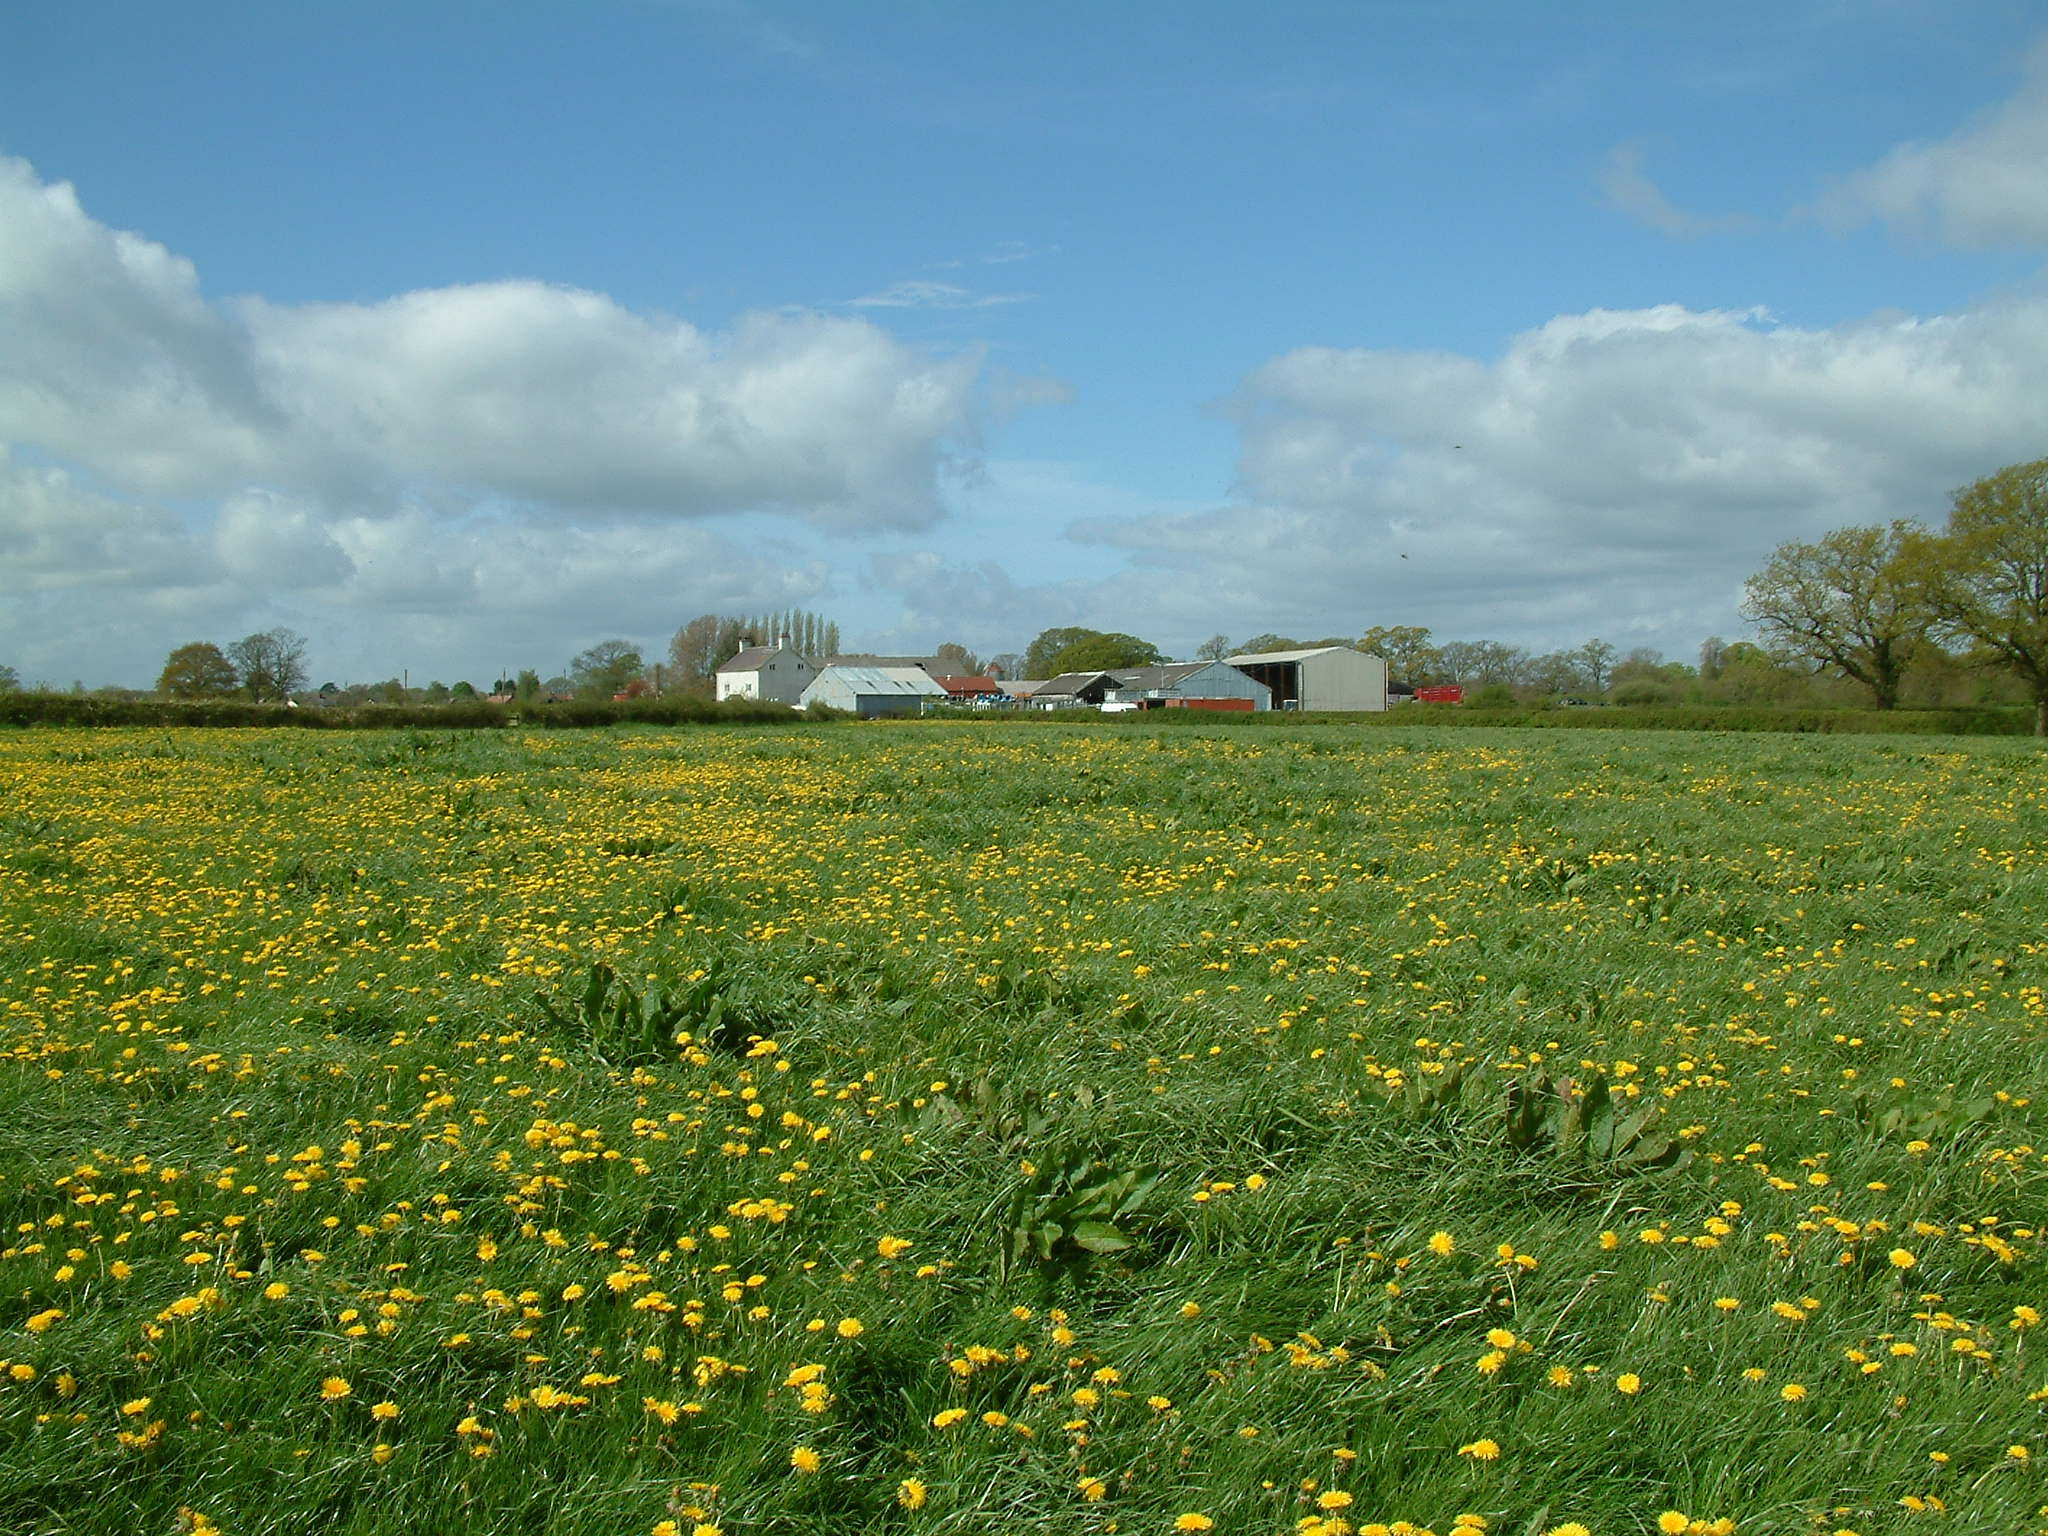 Buttercups will be a problem this spring